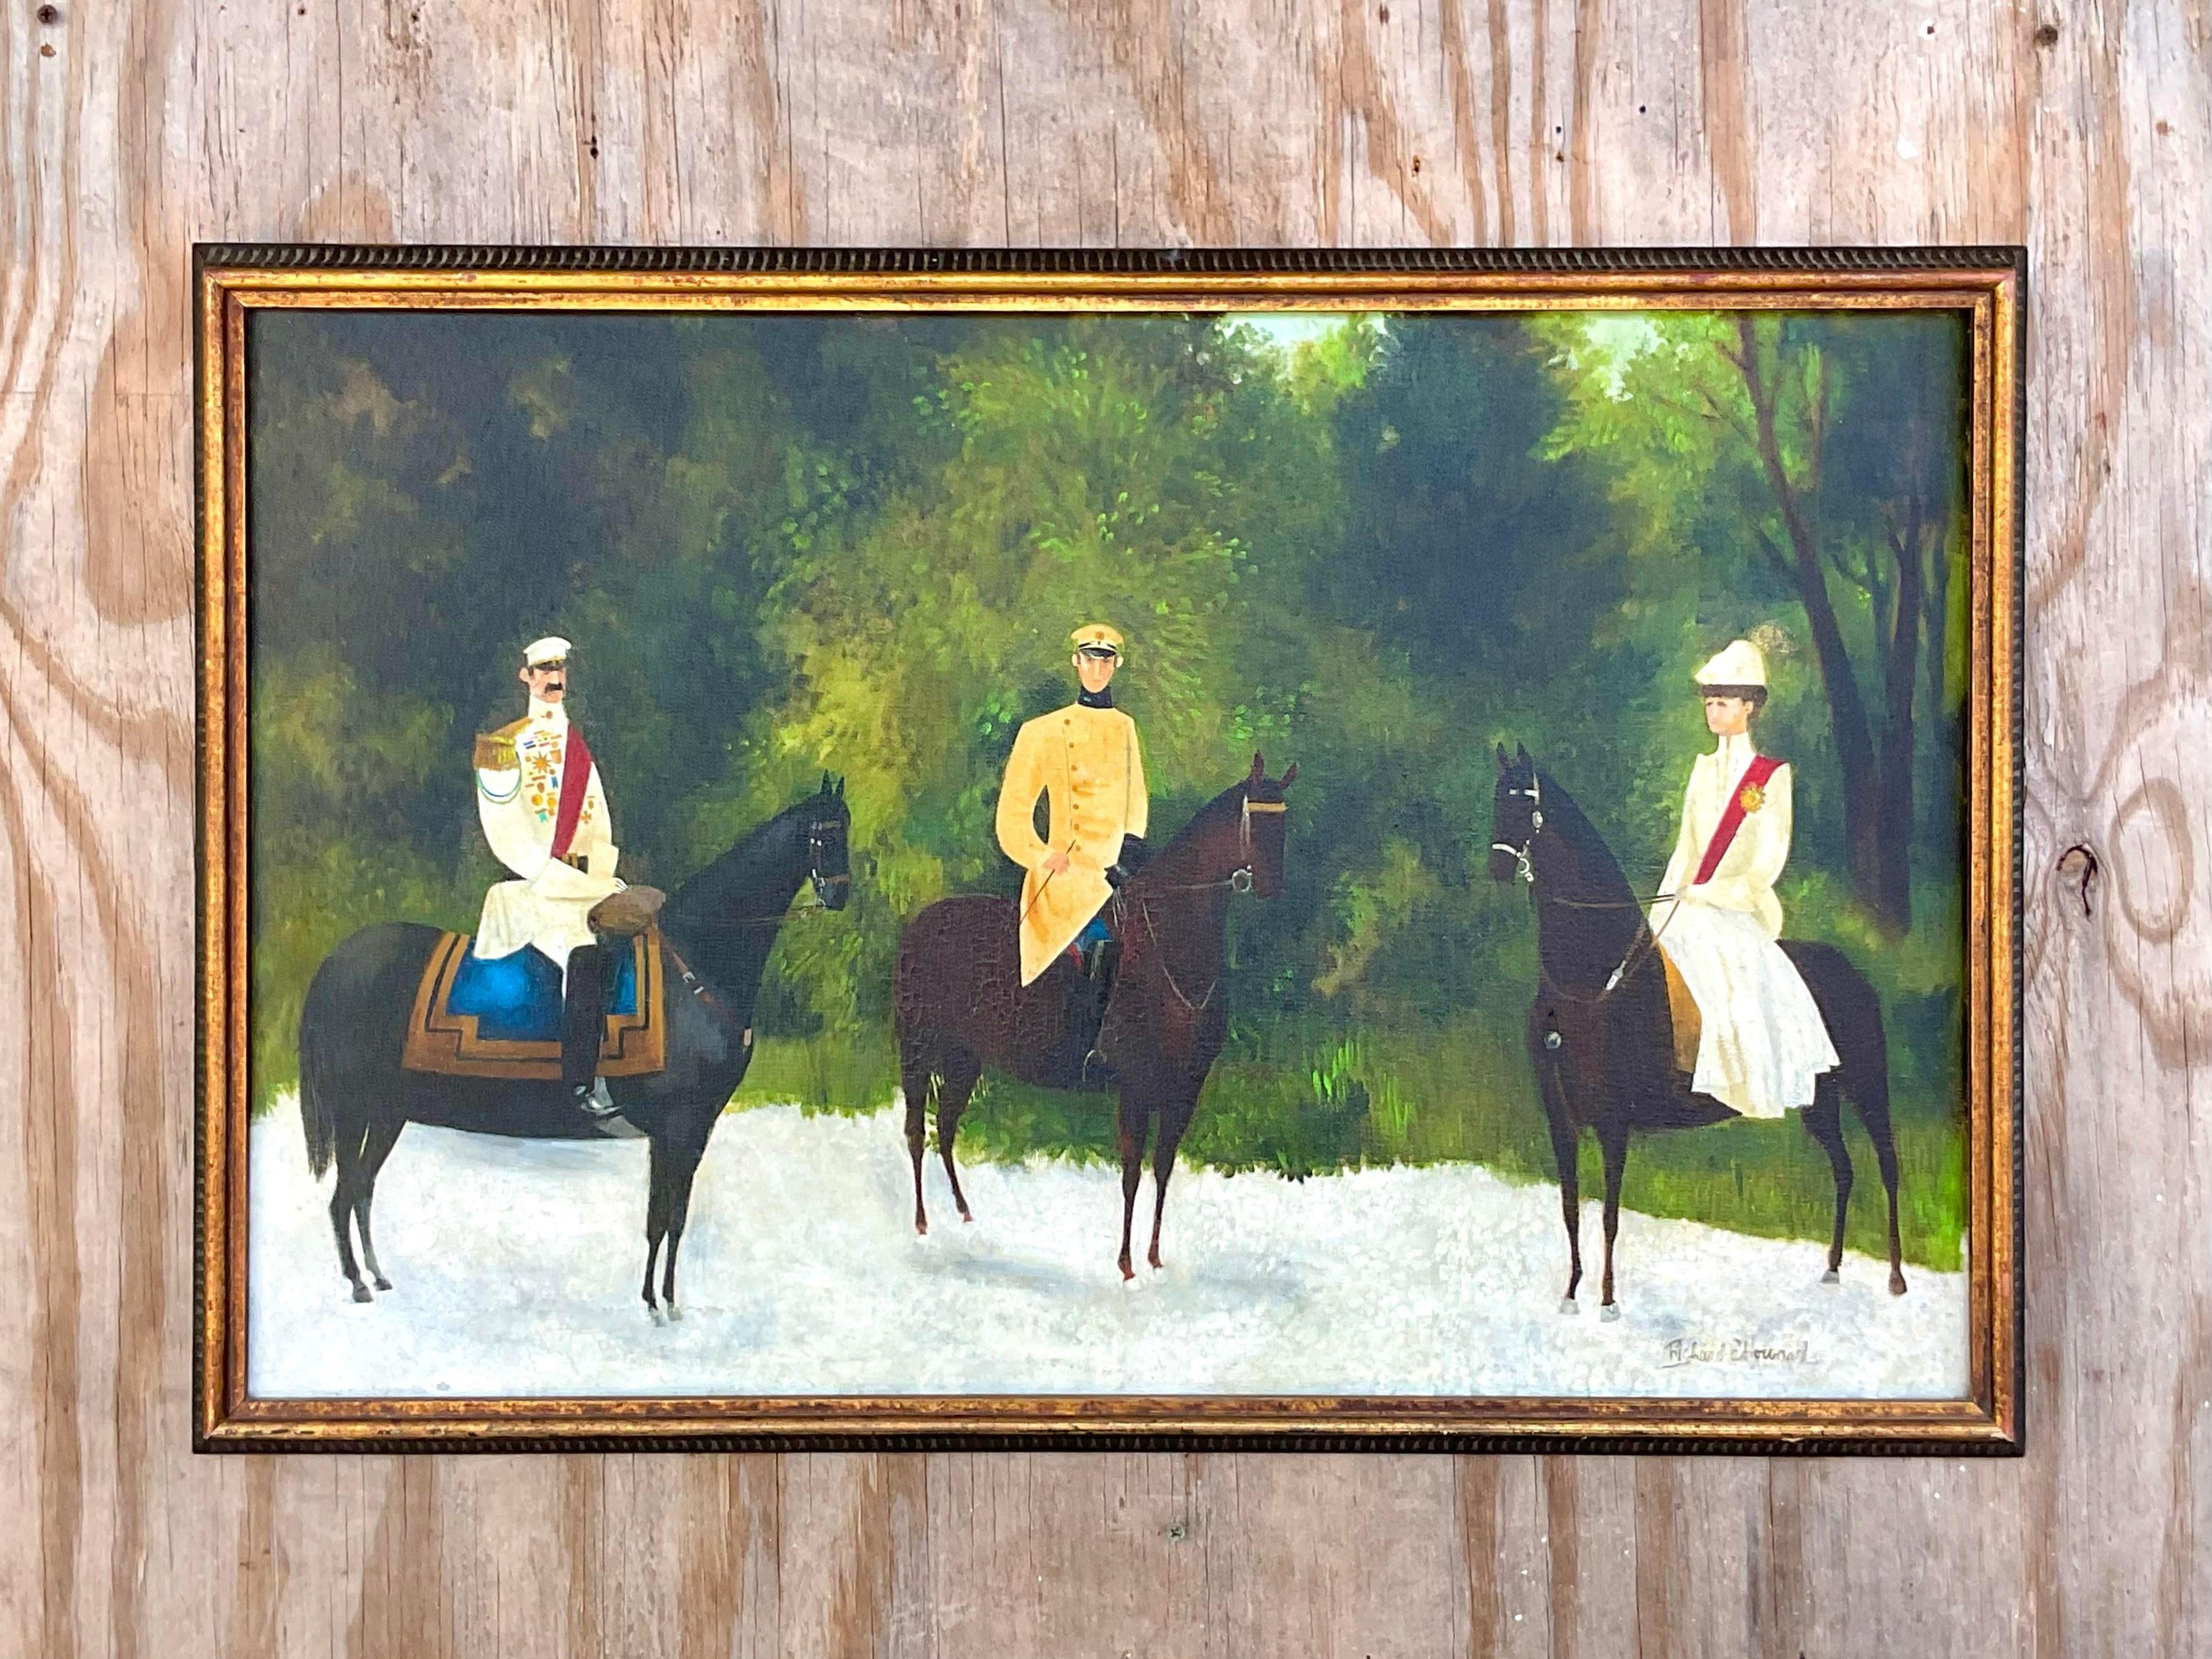 A fantastic vintage Boho original oil painting on canvas. A chic composition of a Royal family in period costume. Acquired from a Palm Beach estate.